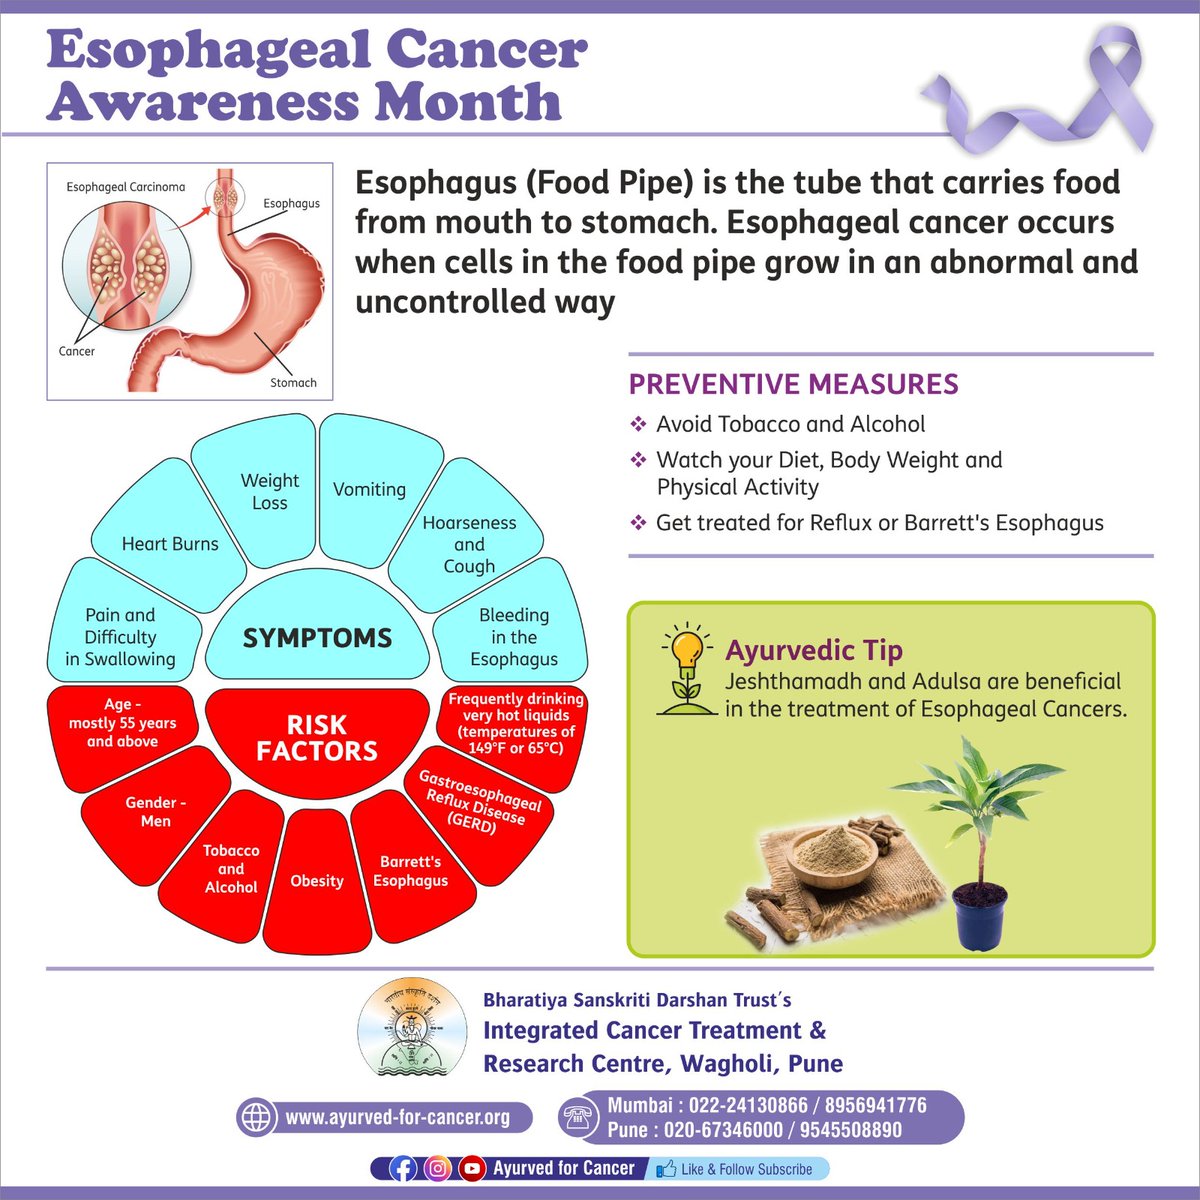 April is observed as Esophageal Cancer Awareness Month. Esophageal Cancer occurs when cells in the food pipe grow in an abnormal uncontrolled way.  Do go thru & share information about #EsophagealCancer, preventive measures, Symptoms, Risk Factors and Tip. #AyurvedForCancer #BSDT